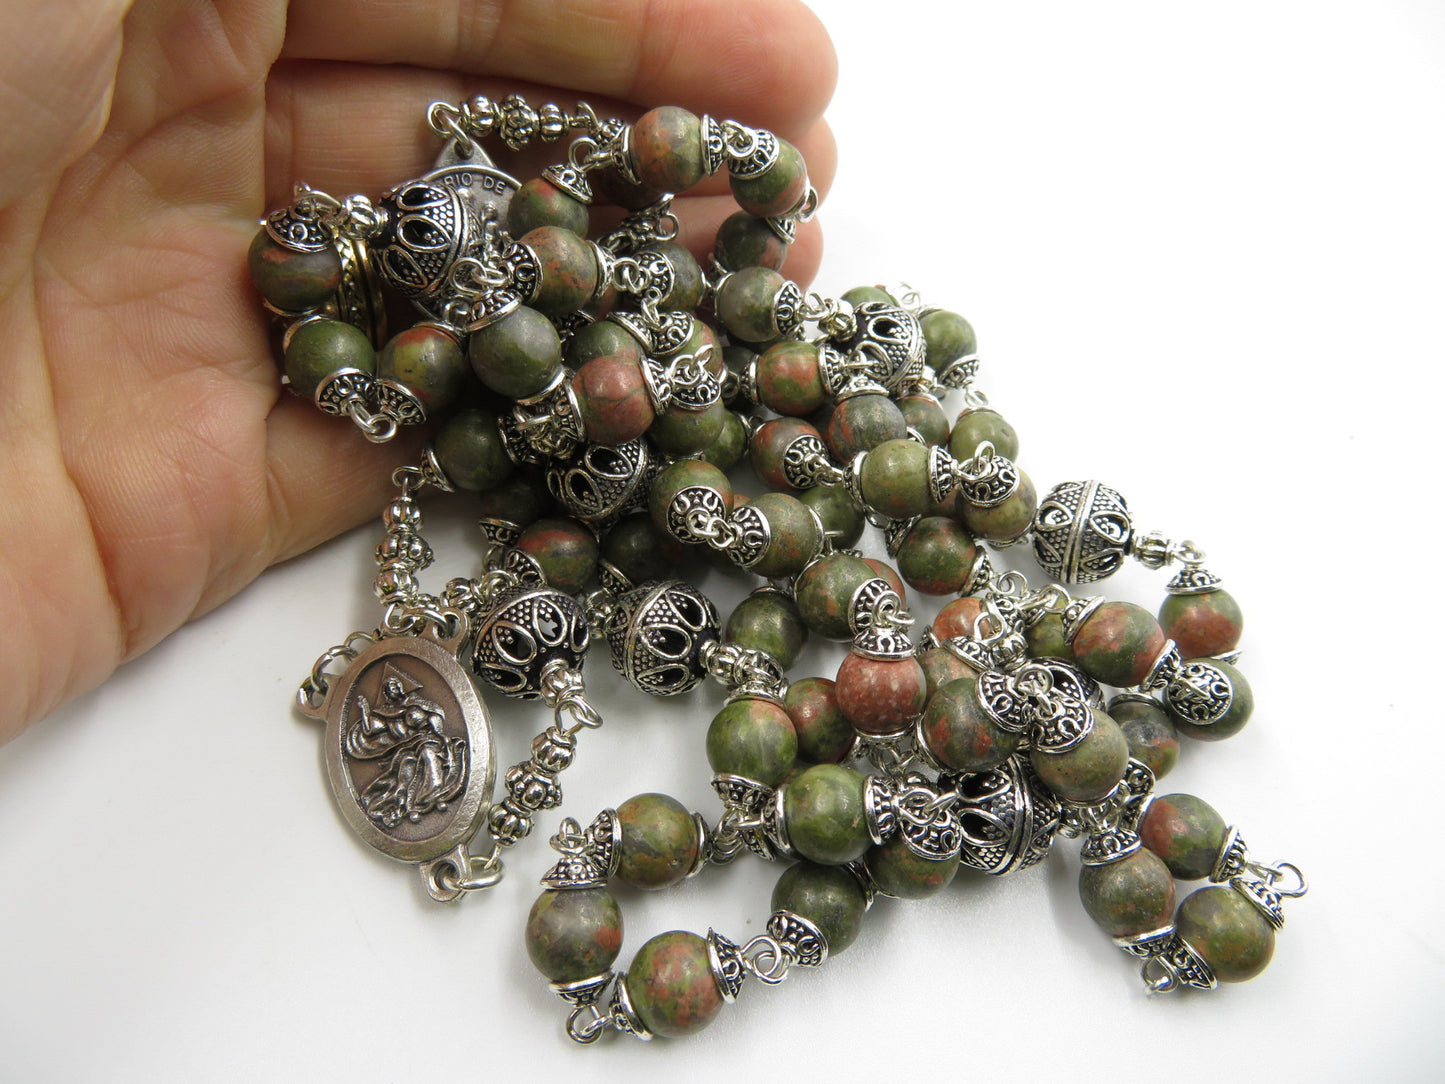 Large God The Father Chaplet Heirloom Gemstone Rosary beads, Our Lady of the Rosary medal, Gemstone Heirloom Rosaries, Men's Prayer Chaplet.